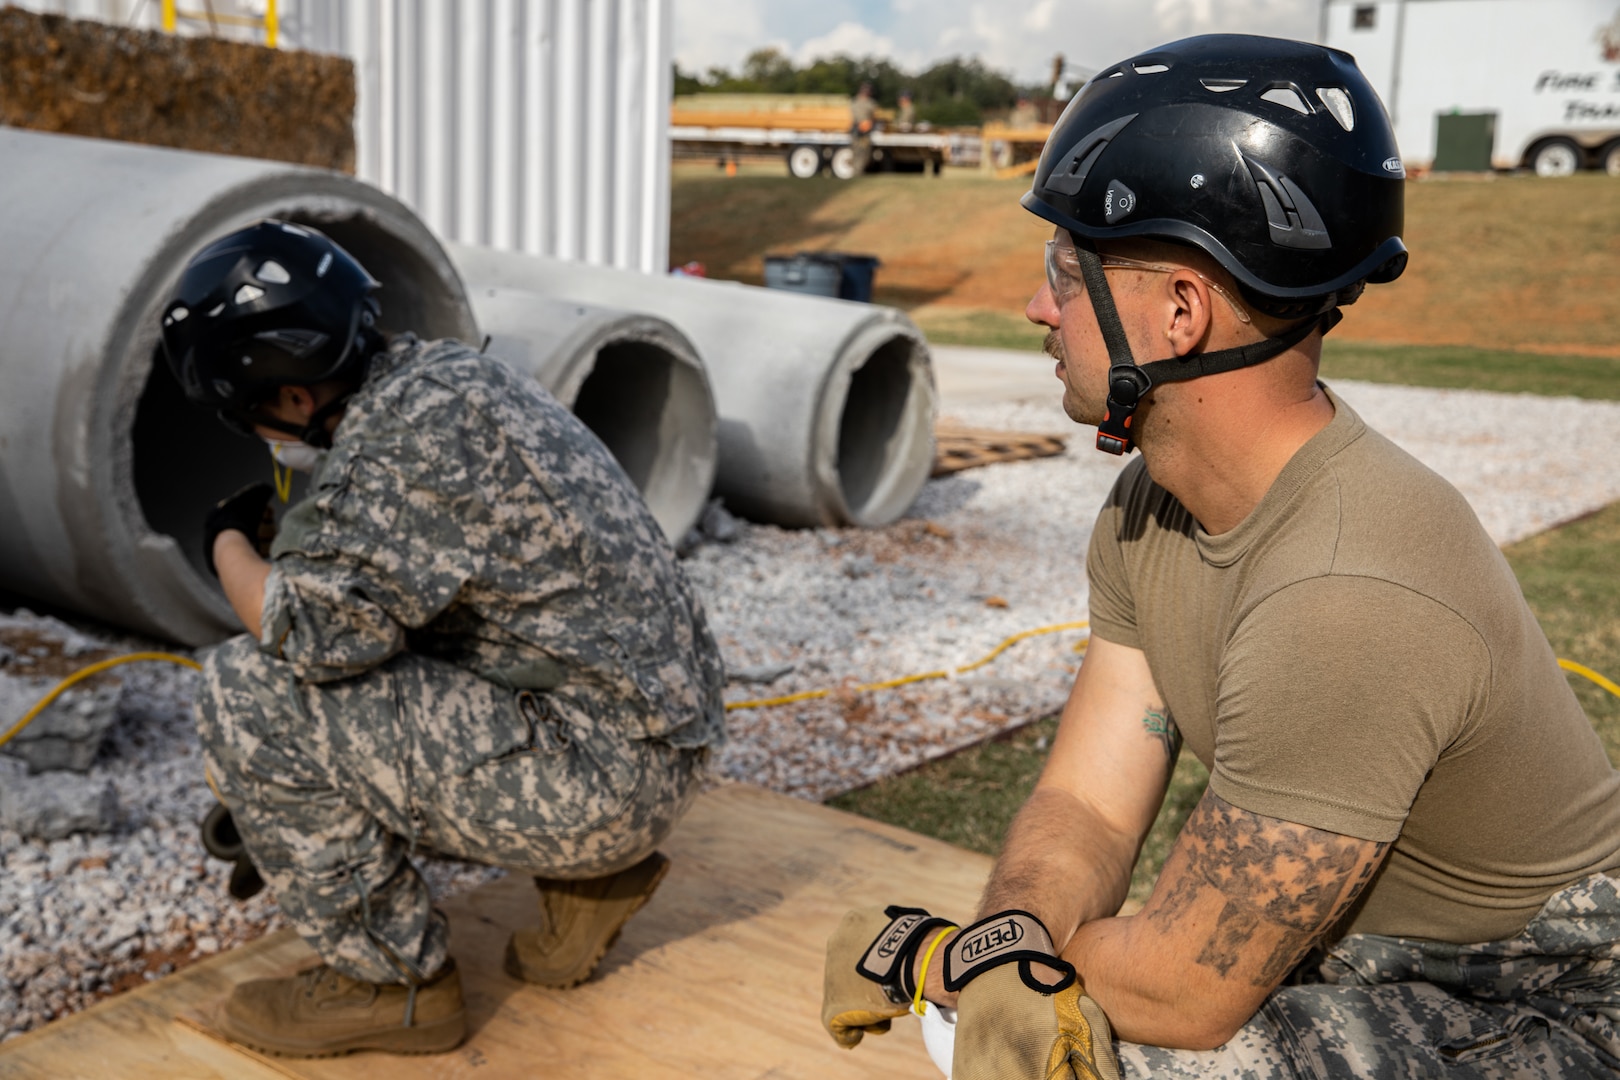 A Member of the Oklahoma National Guard’s 63rd Civil Support Team, Staff Sgt. Christina Burgess, and Warrant Officer Zachary Bradfield, help drill a hole through concrete during a collapsed building exercise at the Edmond Fire Training Center, Edmond, Oklahoma, October 4, 2023. This simulation is part of a biennial weeklong operational readiness exercise, designed to ensure local first responders maintain preparedness and familiarity with one another. (Oklahoma National Guard photo by Staff Sgt. Reece Heck)